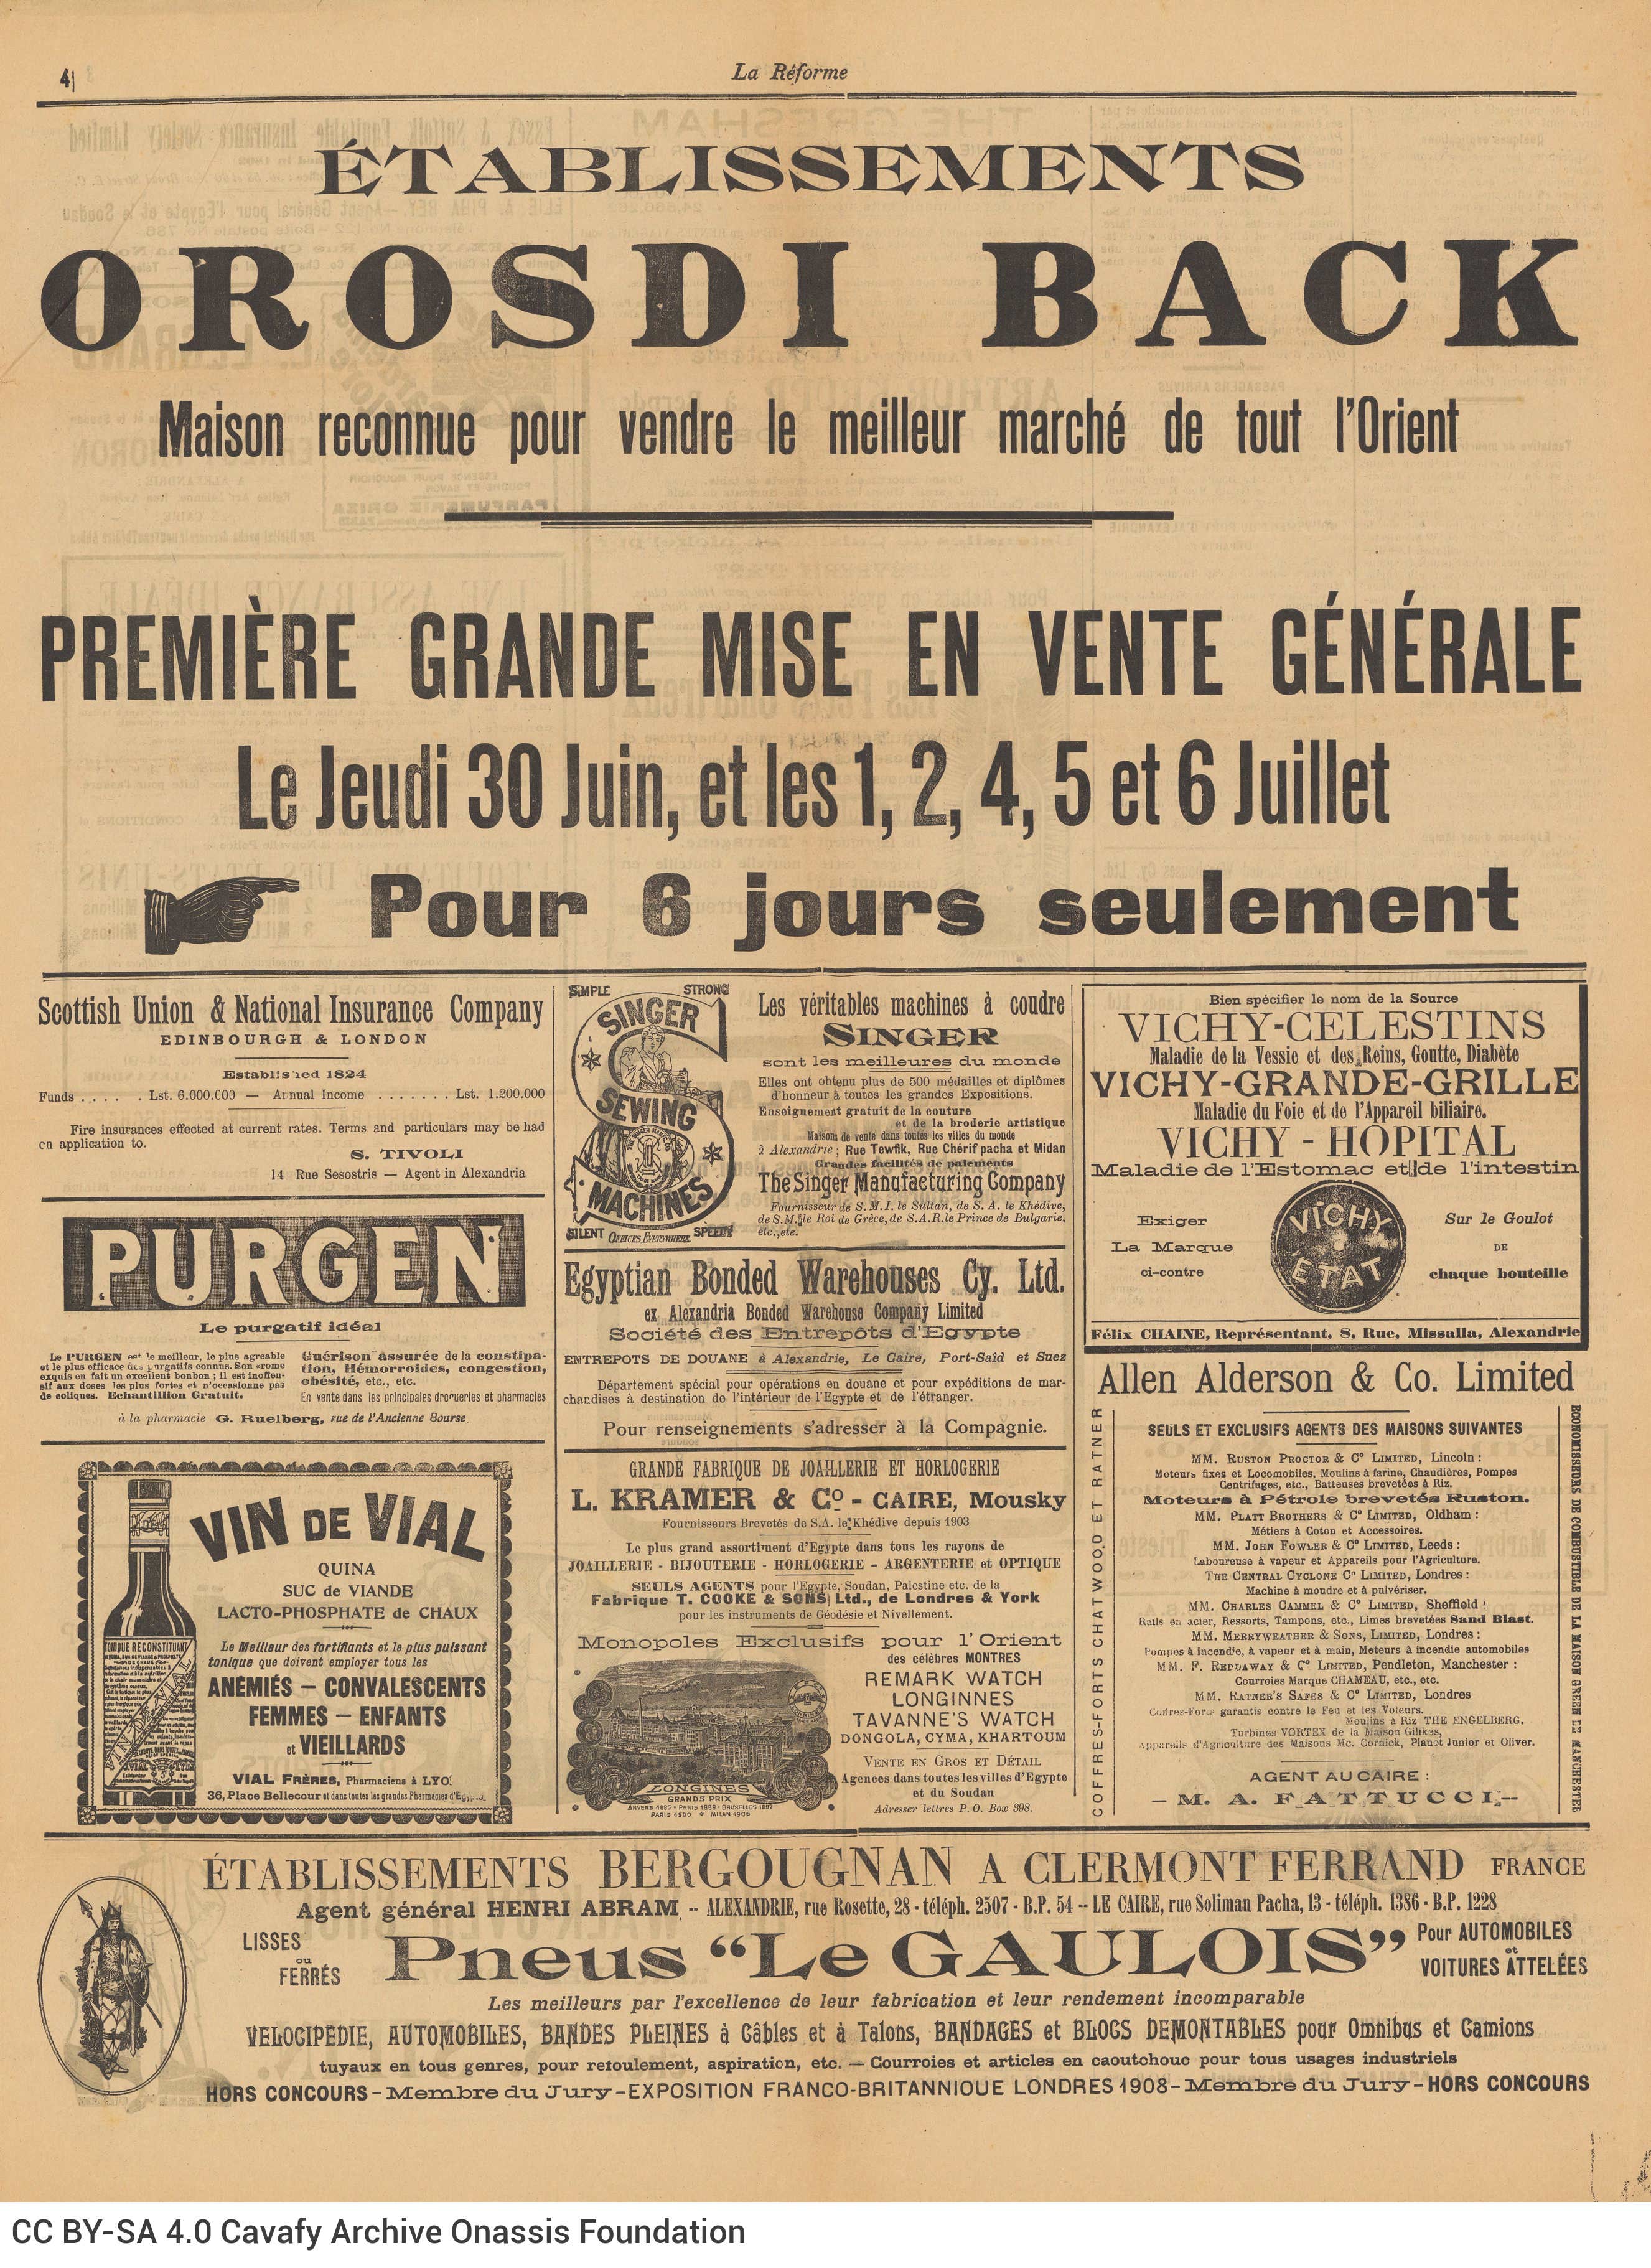 Ten issues of the French-language newspaper *La Réforme* of Alexandria (one of the issues is double). Only the first two pag